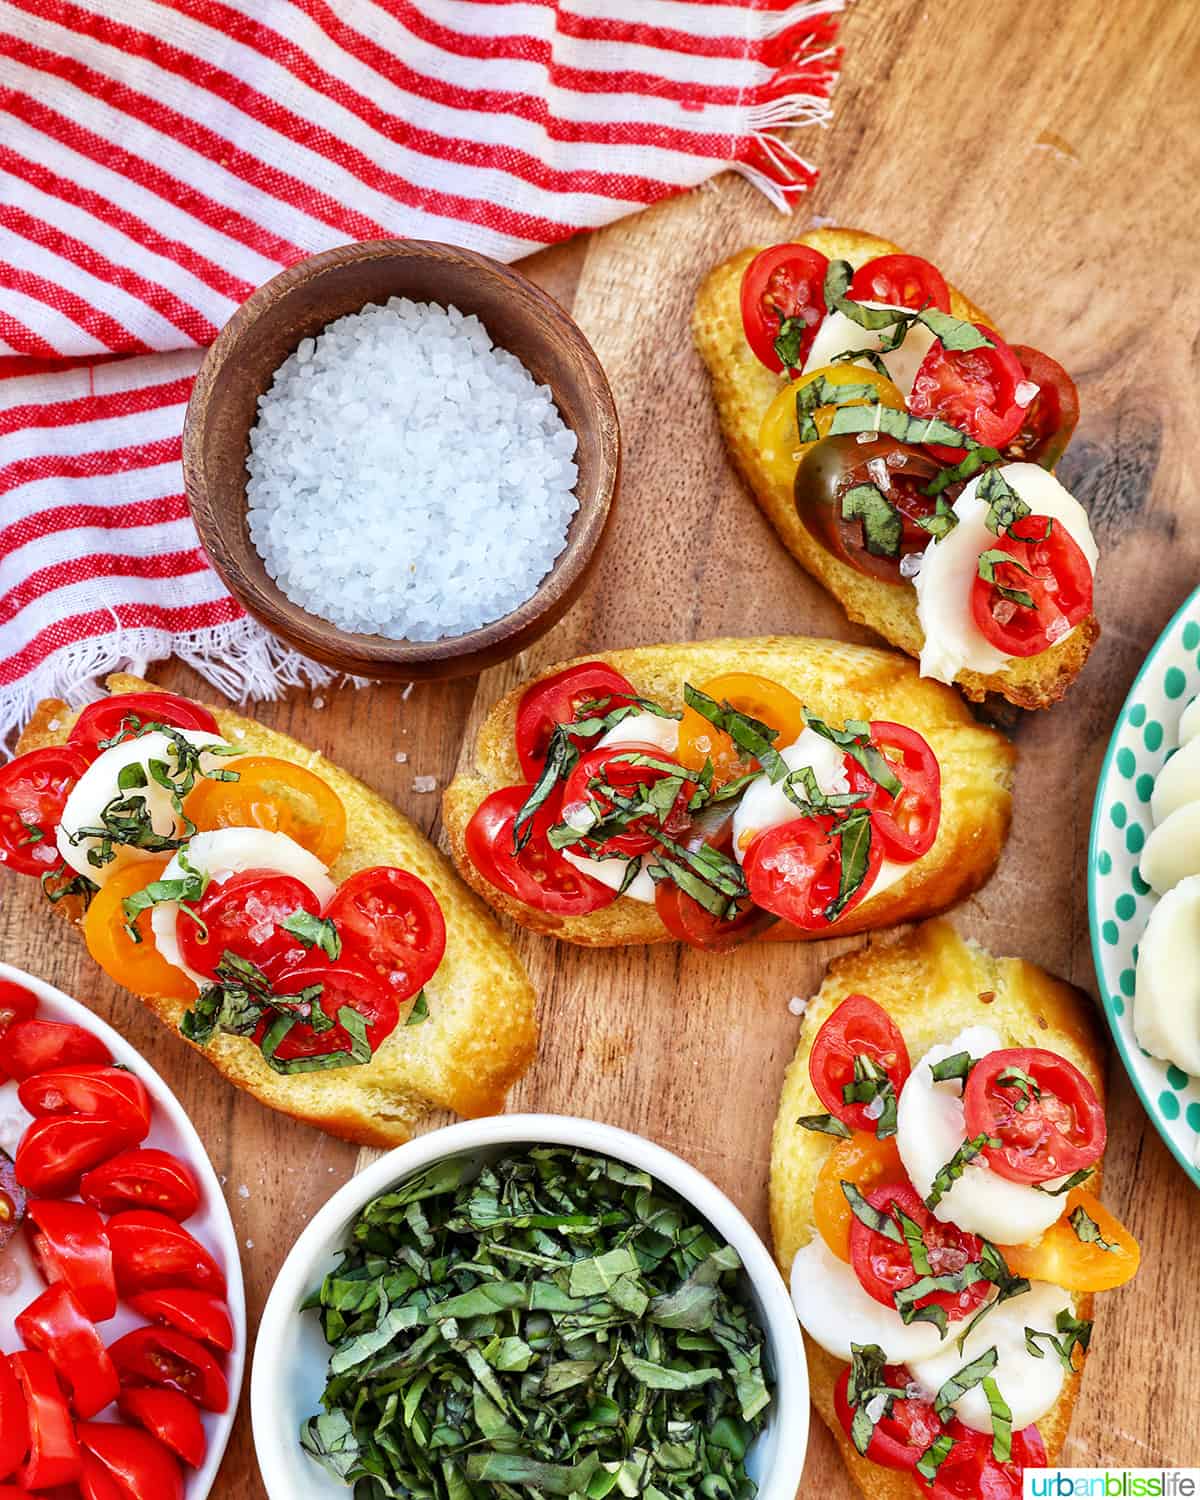 crostini with tomatoes, mozzarella, basil surrounded by plates of the same toppings and a bowl of sea salt.